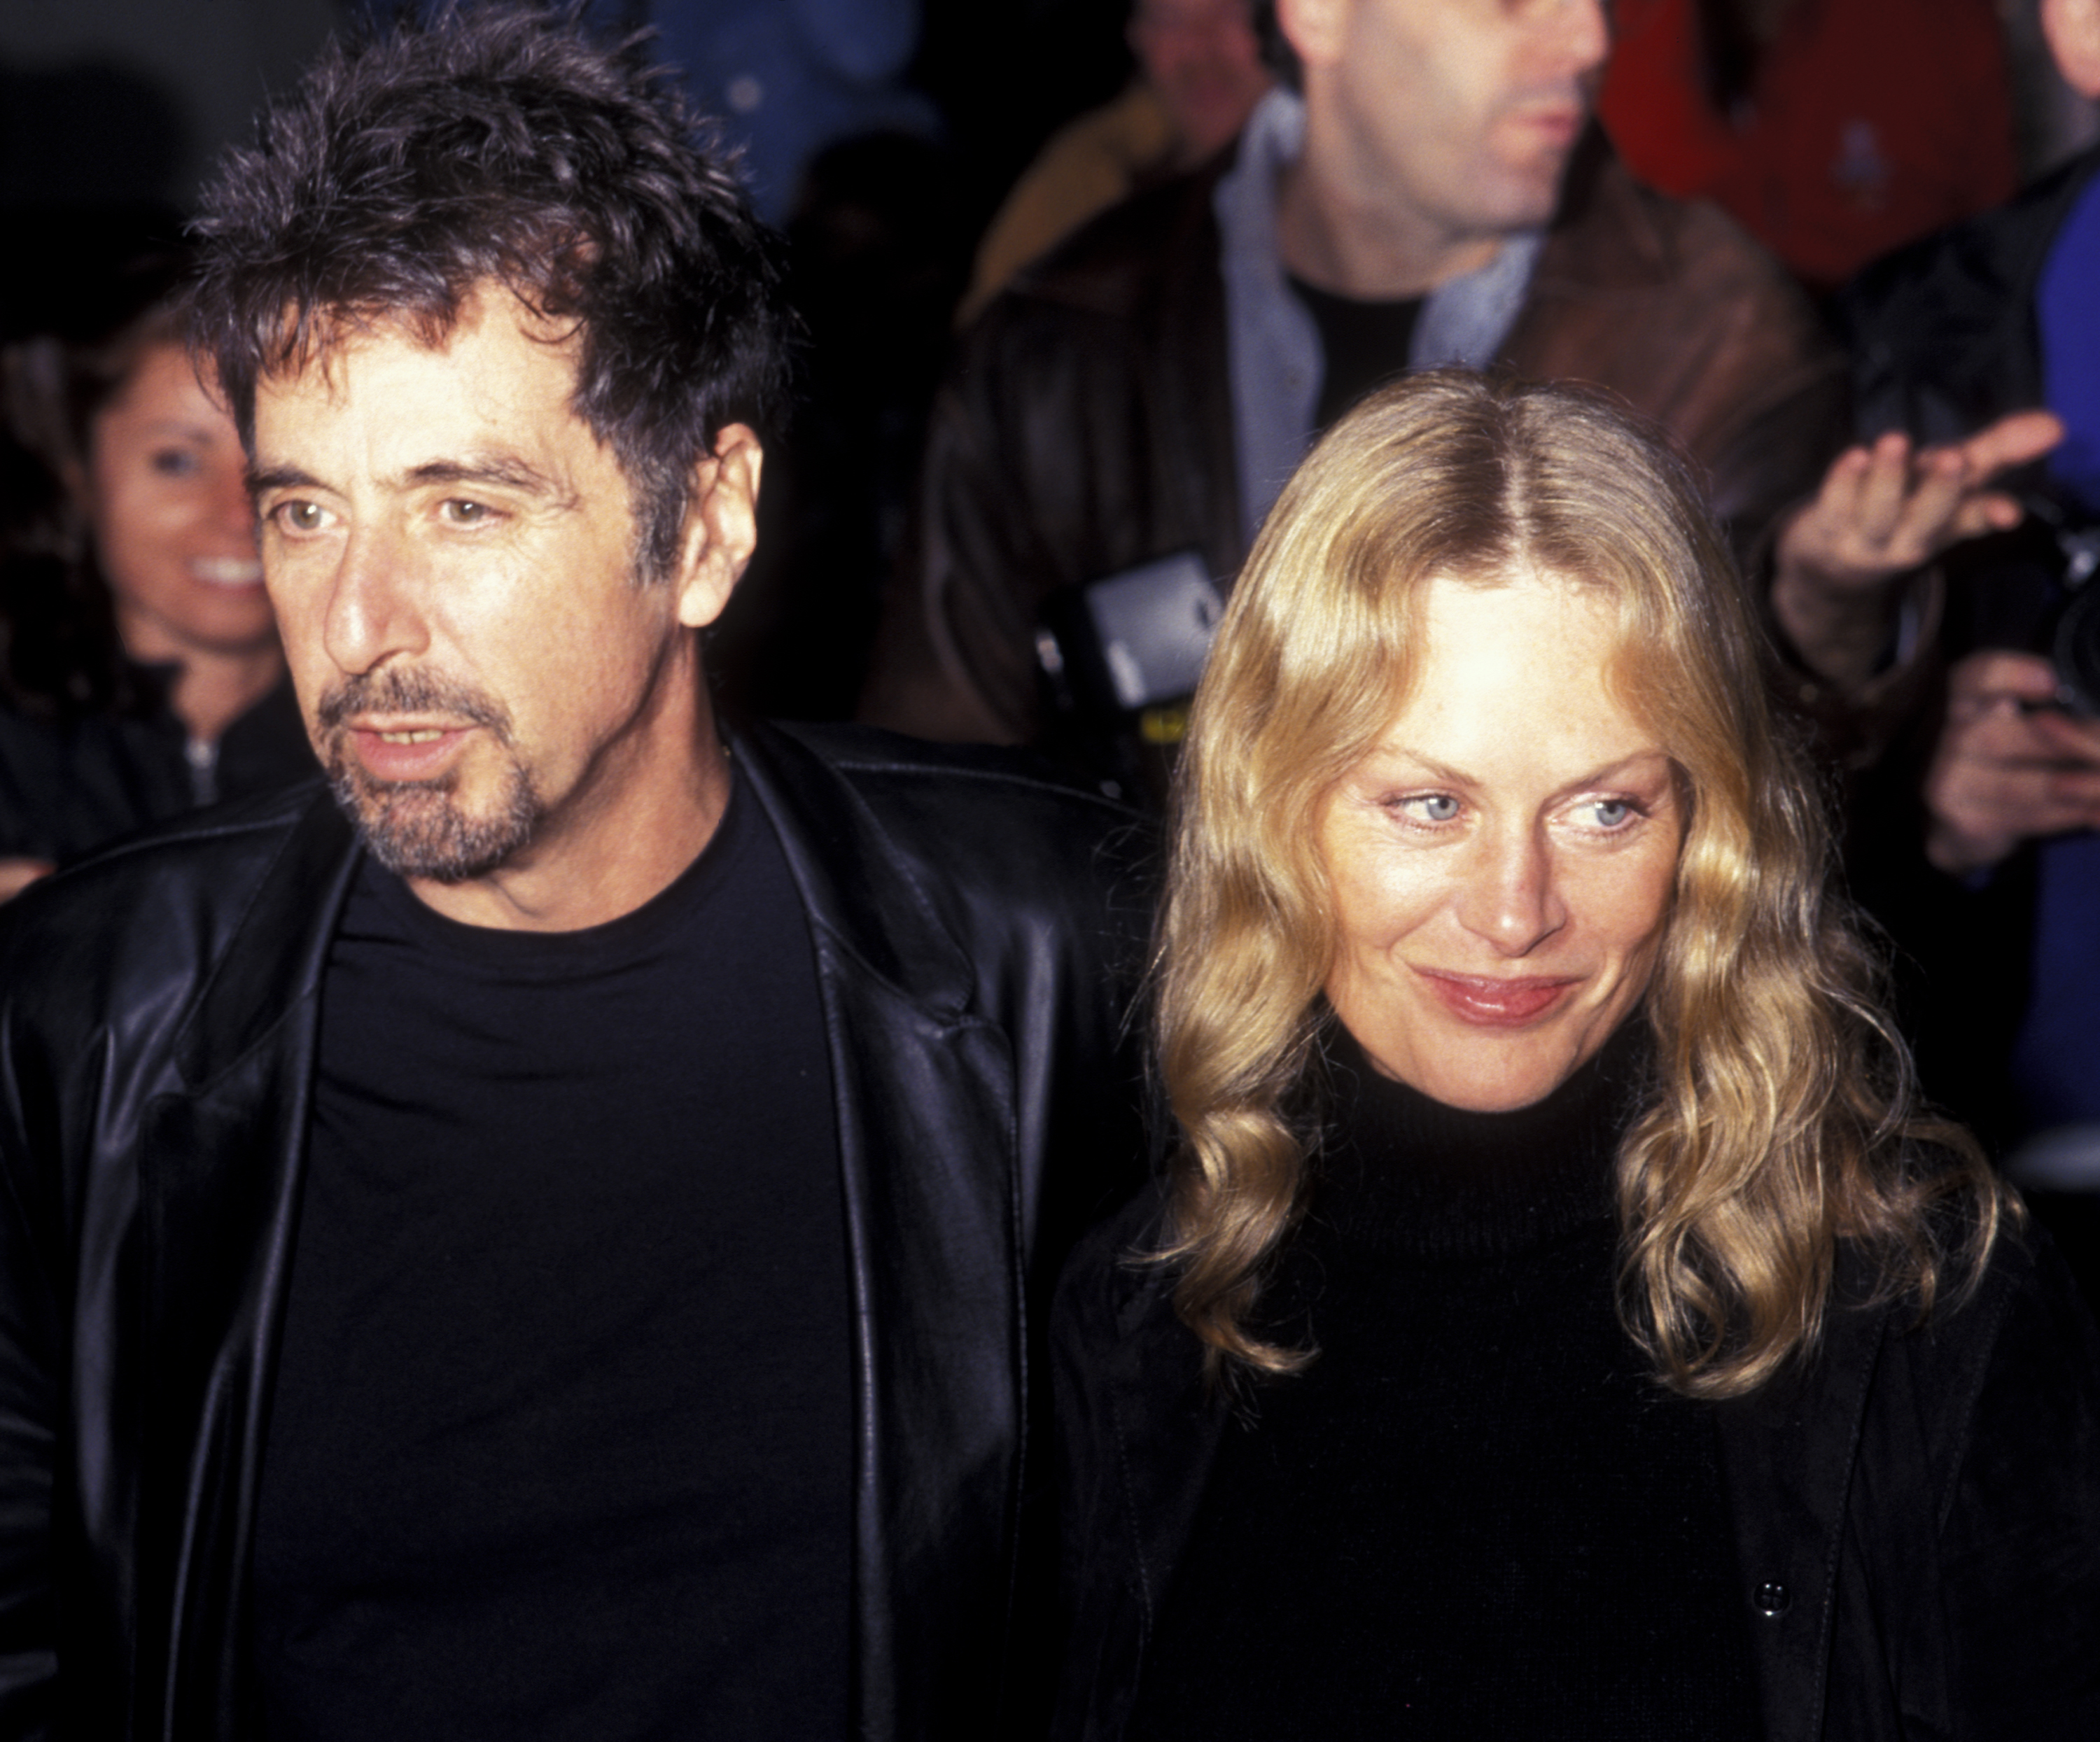 Al Pacino and Beverly D'Angelo at the premiere party of "The Insiders" | Source: Getty Images